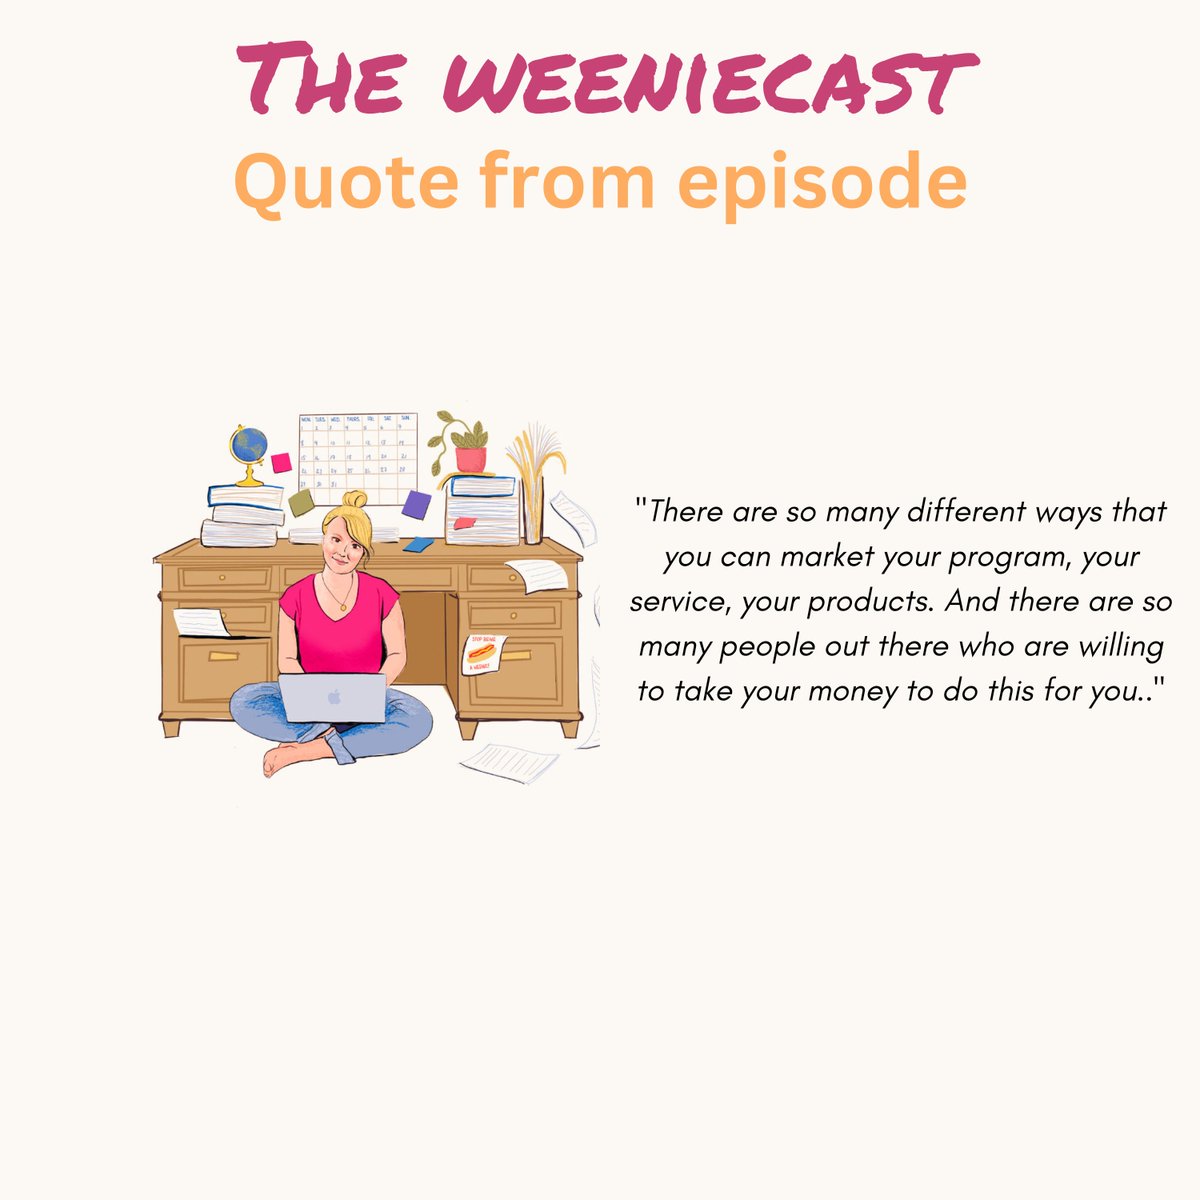 Being a business owner with ADHD, means you have to understand where to prioritise your time. 
Check out the latest episode of Weeniecast where I tell you exactly WHY you need to stop marketing your business!
weeniecast.com/47

#ADHDCoach #ADHDBusinessOwner #Weeniecast